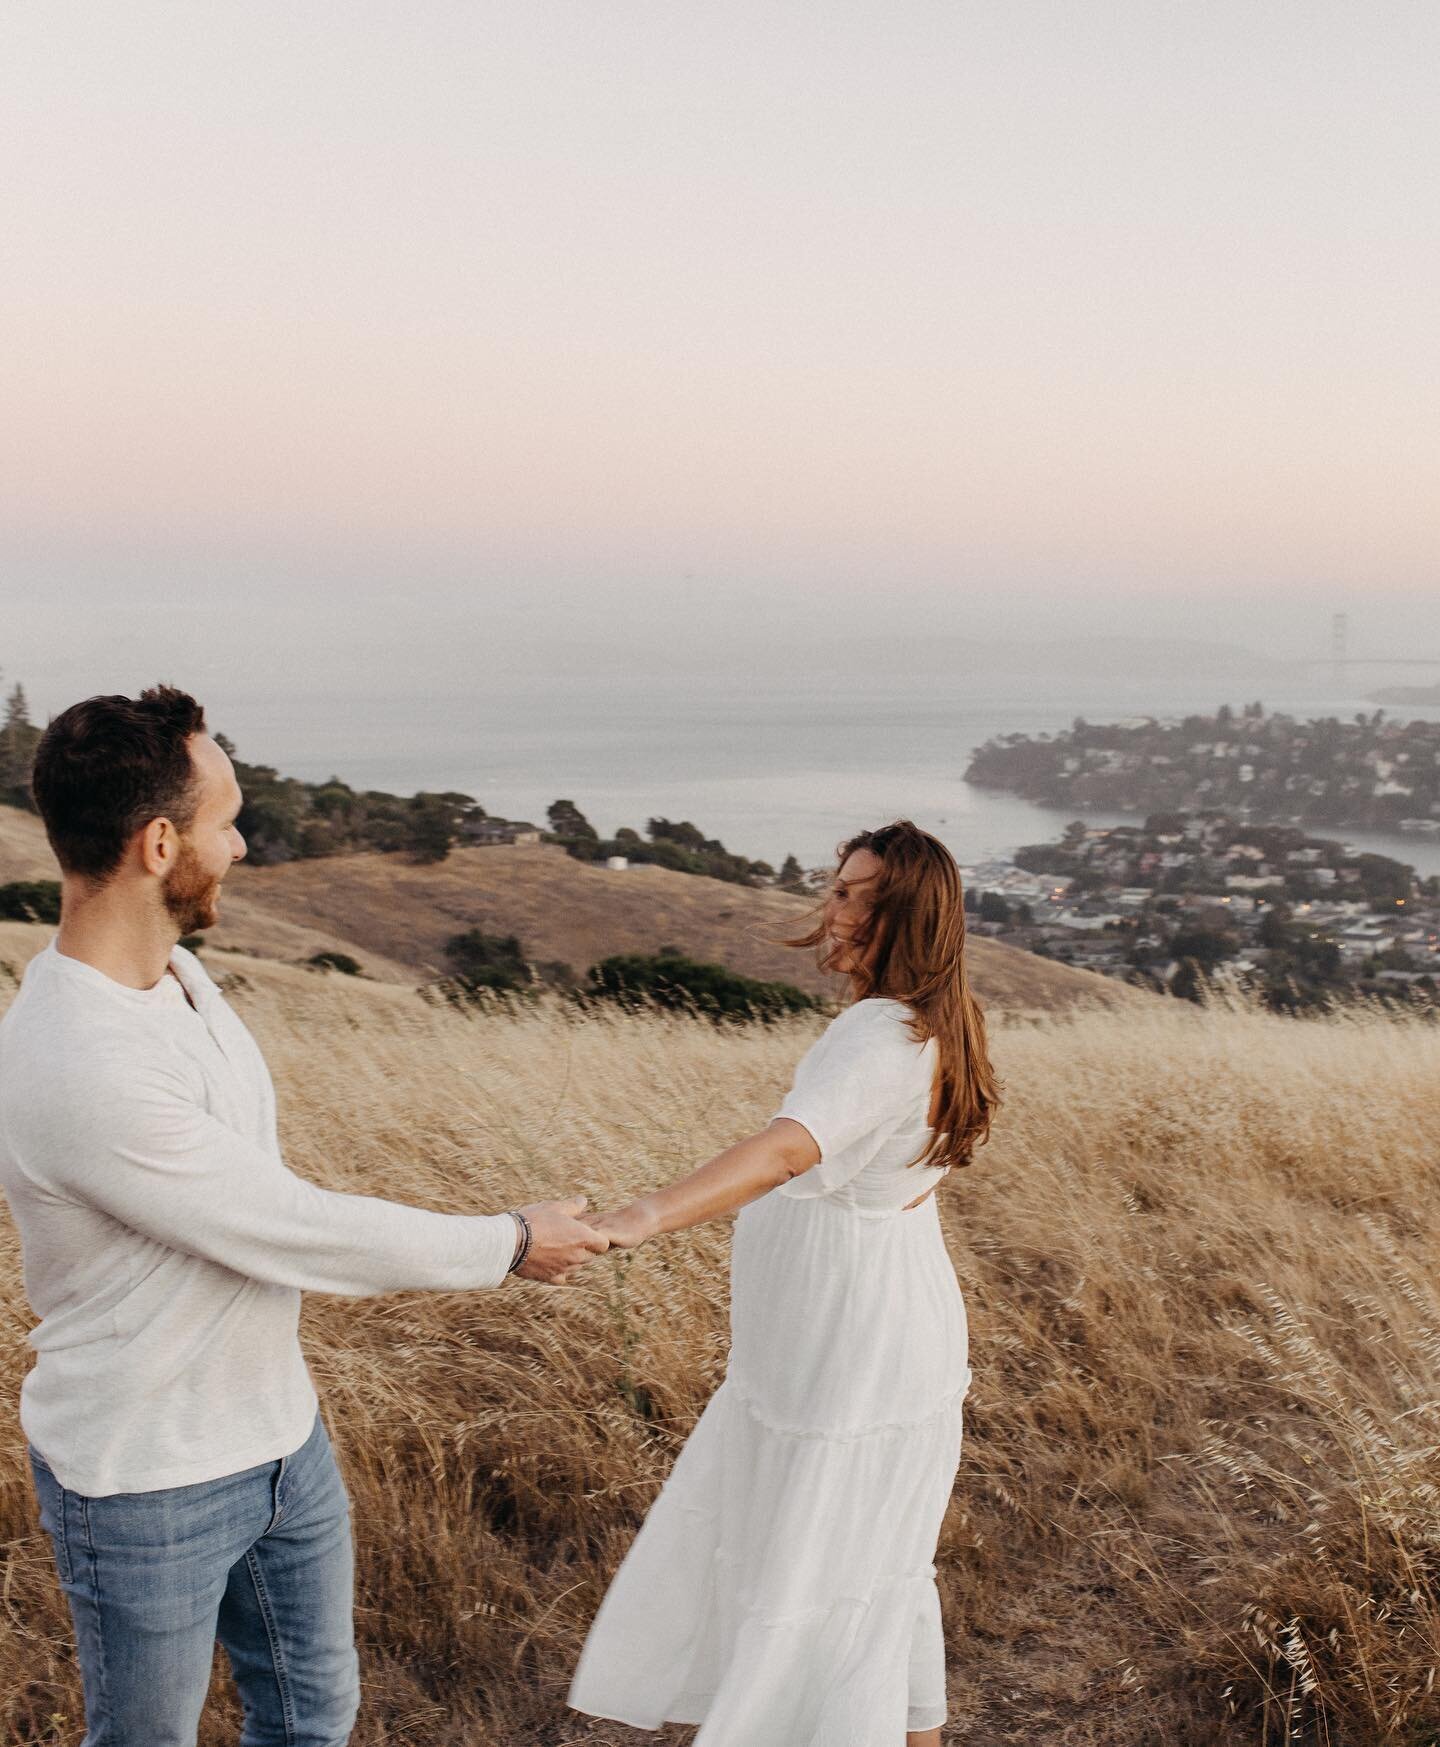 A couple holds hands in a golden field overlooking a scenic coastline at sunset, creating a warm, peaceful ambiance.